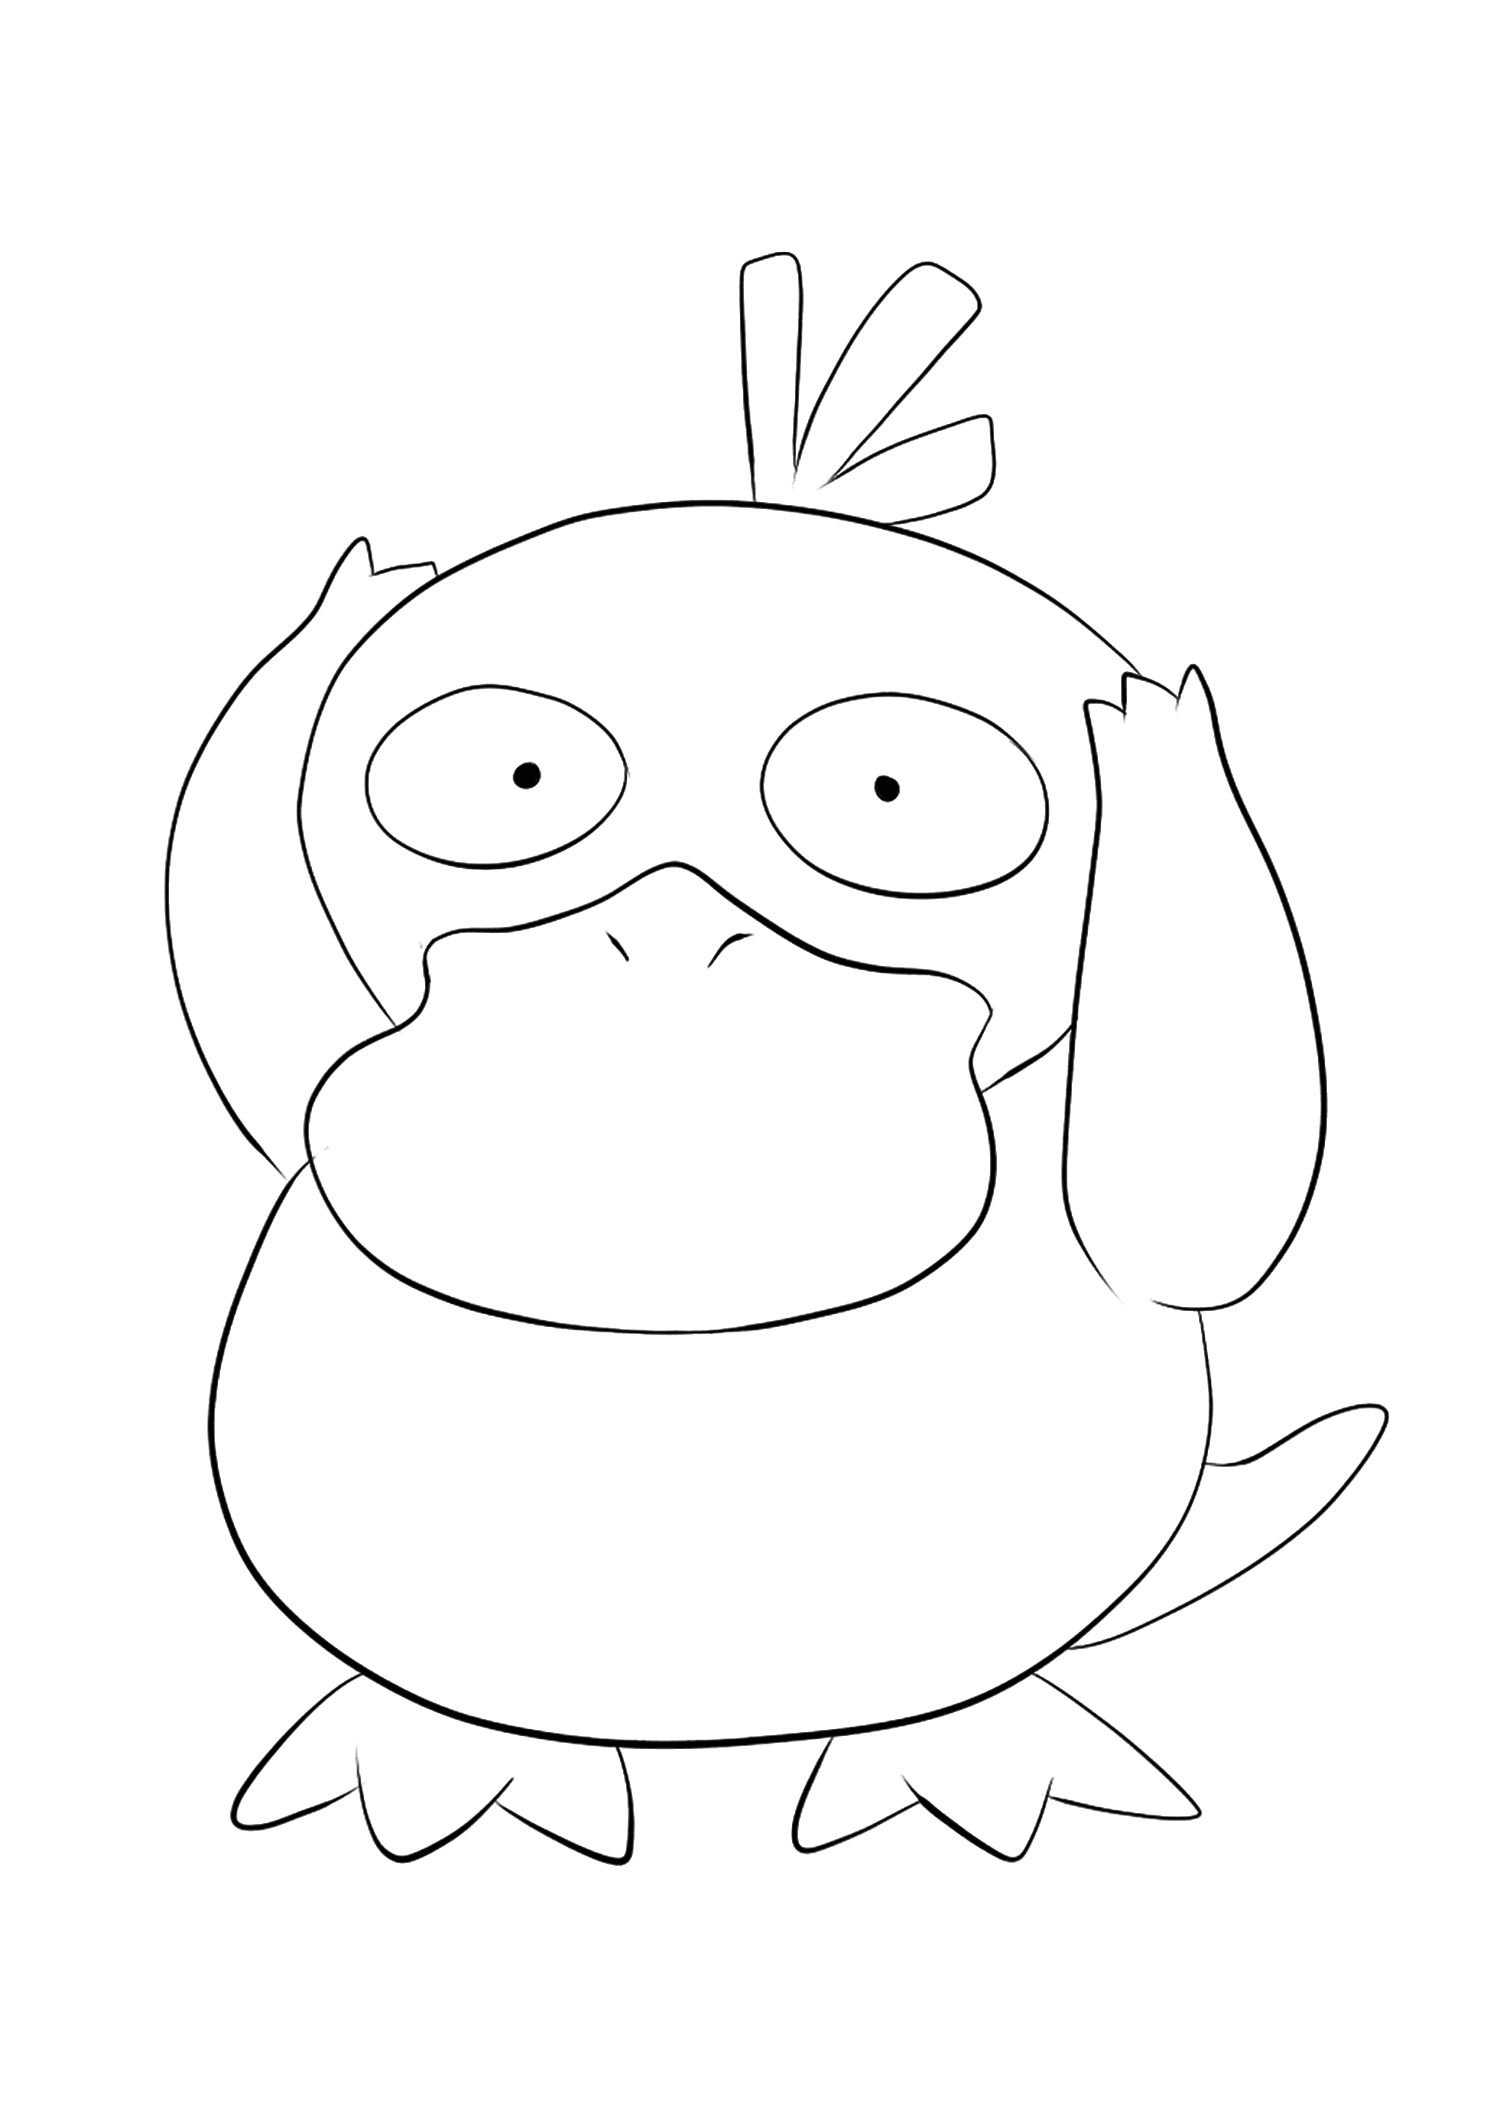 Psyduck (No.54). Psyduck Coloring page, Generation I Pokemon of type WaterOriginal image credit: Pokemon linearts by Lilly Gerbil on Deviantart.Permission:  All rights reserved © Pokemon company and Ken Sugimori.